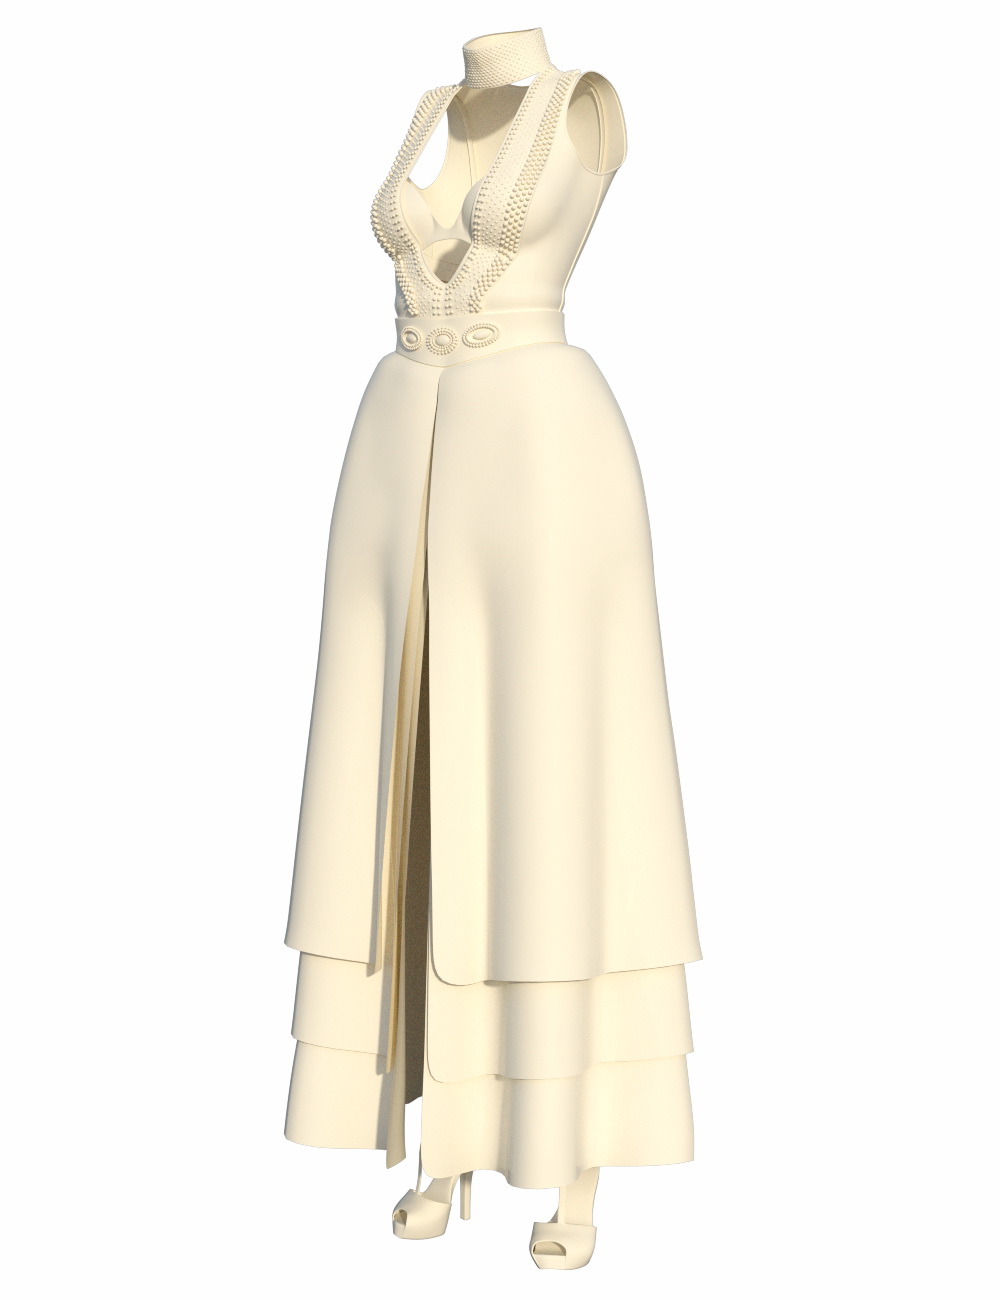 Layer Dress for Genesis 3 Female(s) by: chungdan, 3D Models by Daz 3D